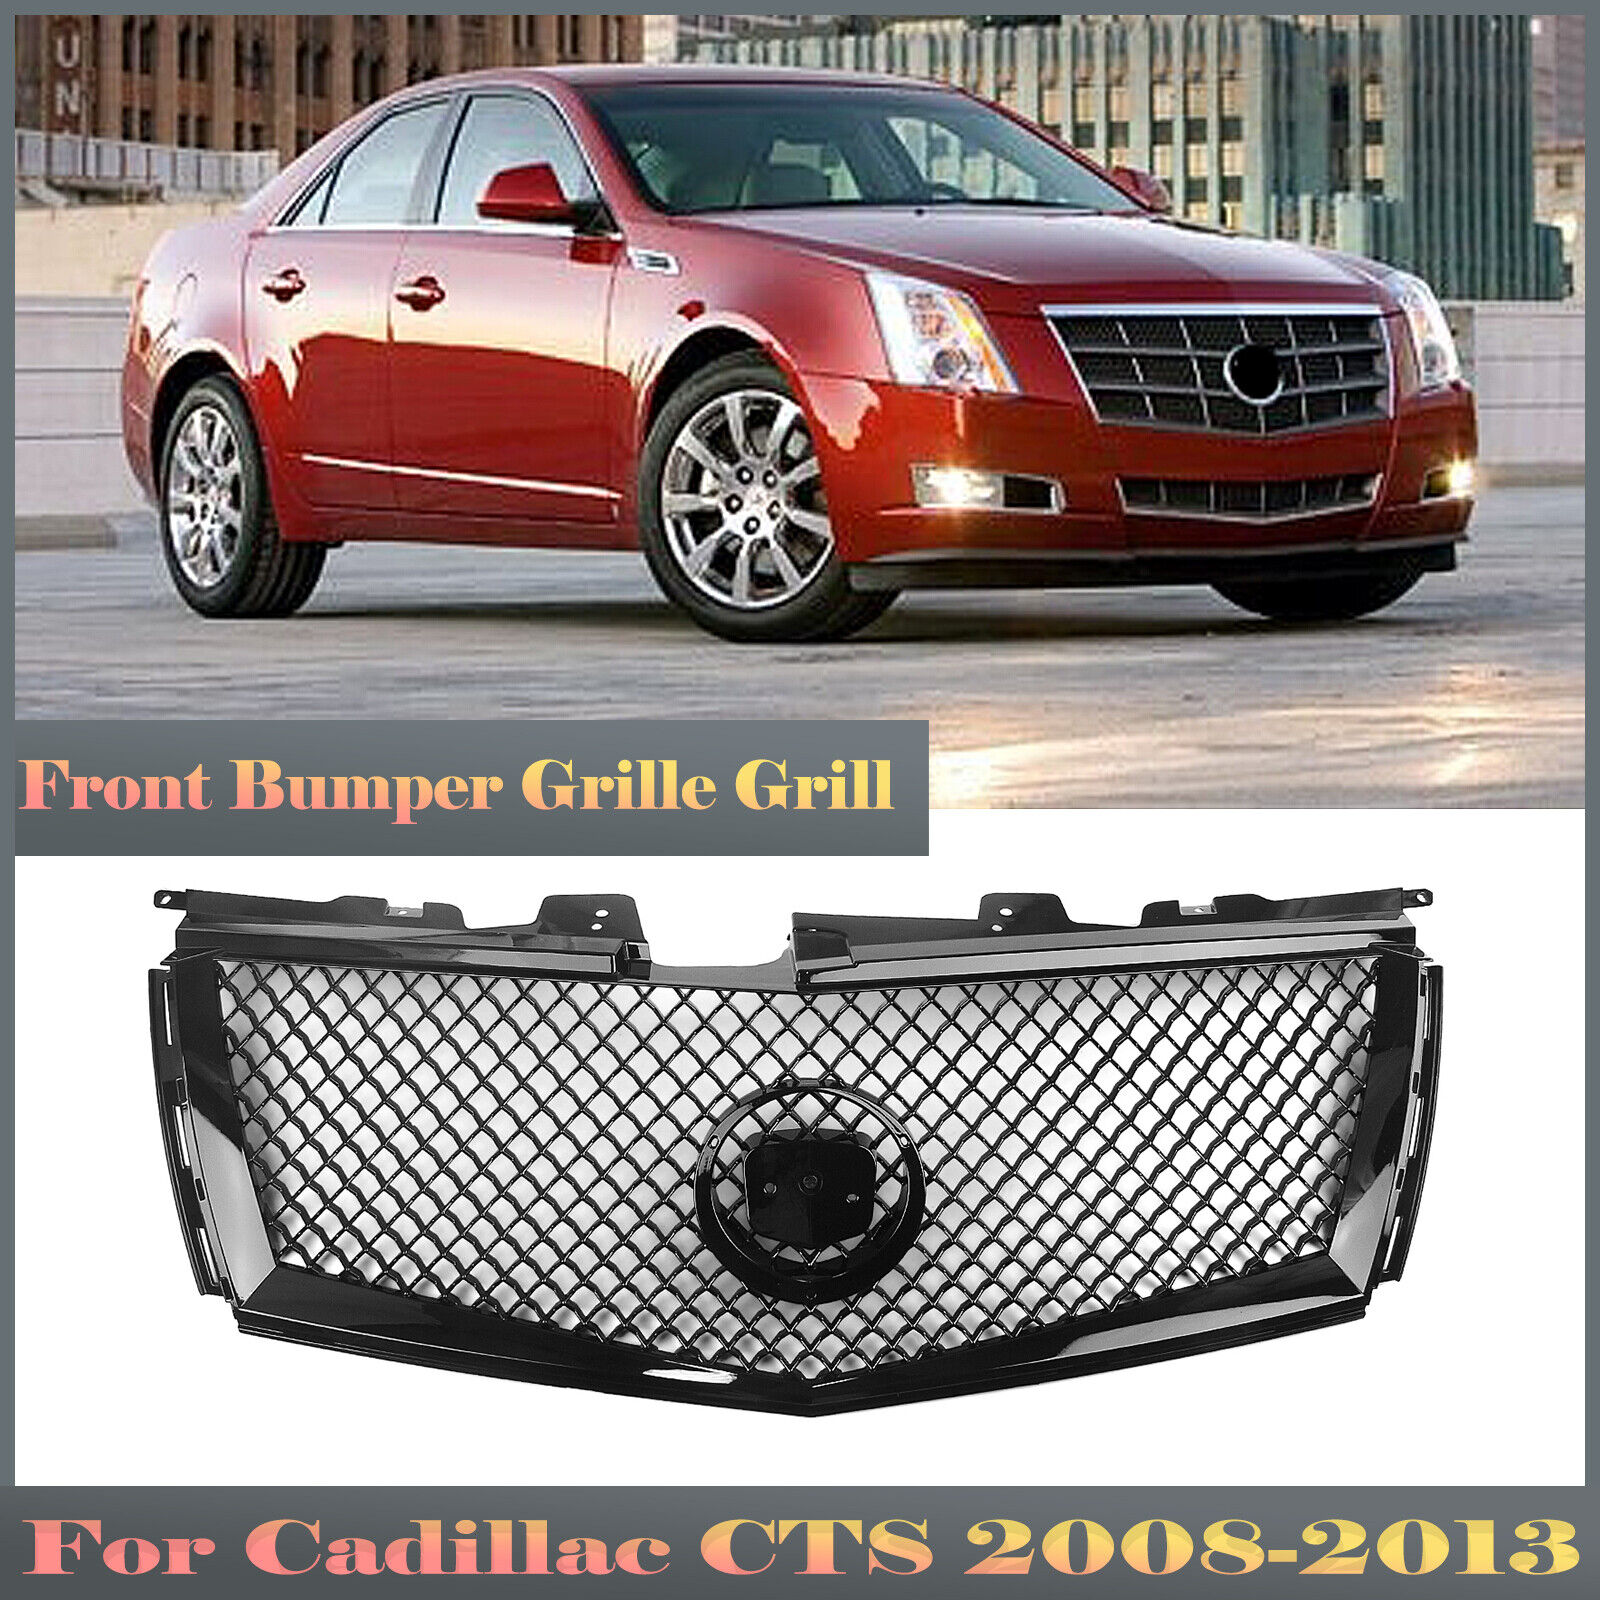 1x Front Bumper Grille Mesh Grill For Cadillac CTS 2008-13 Black Honeycomb Look